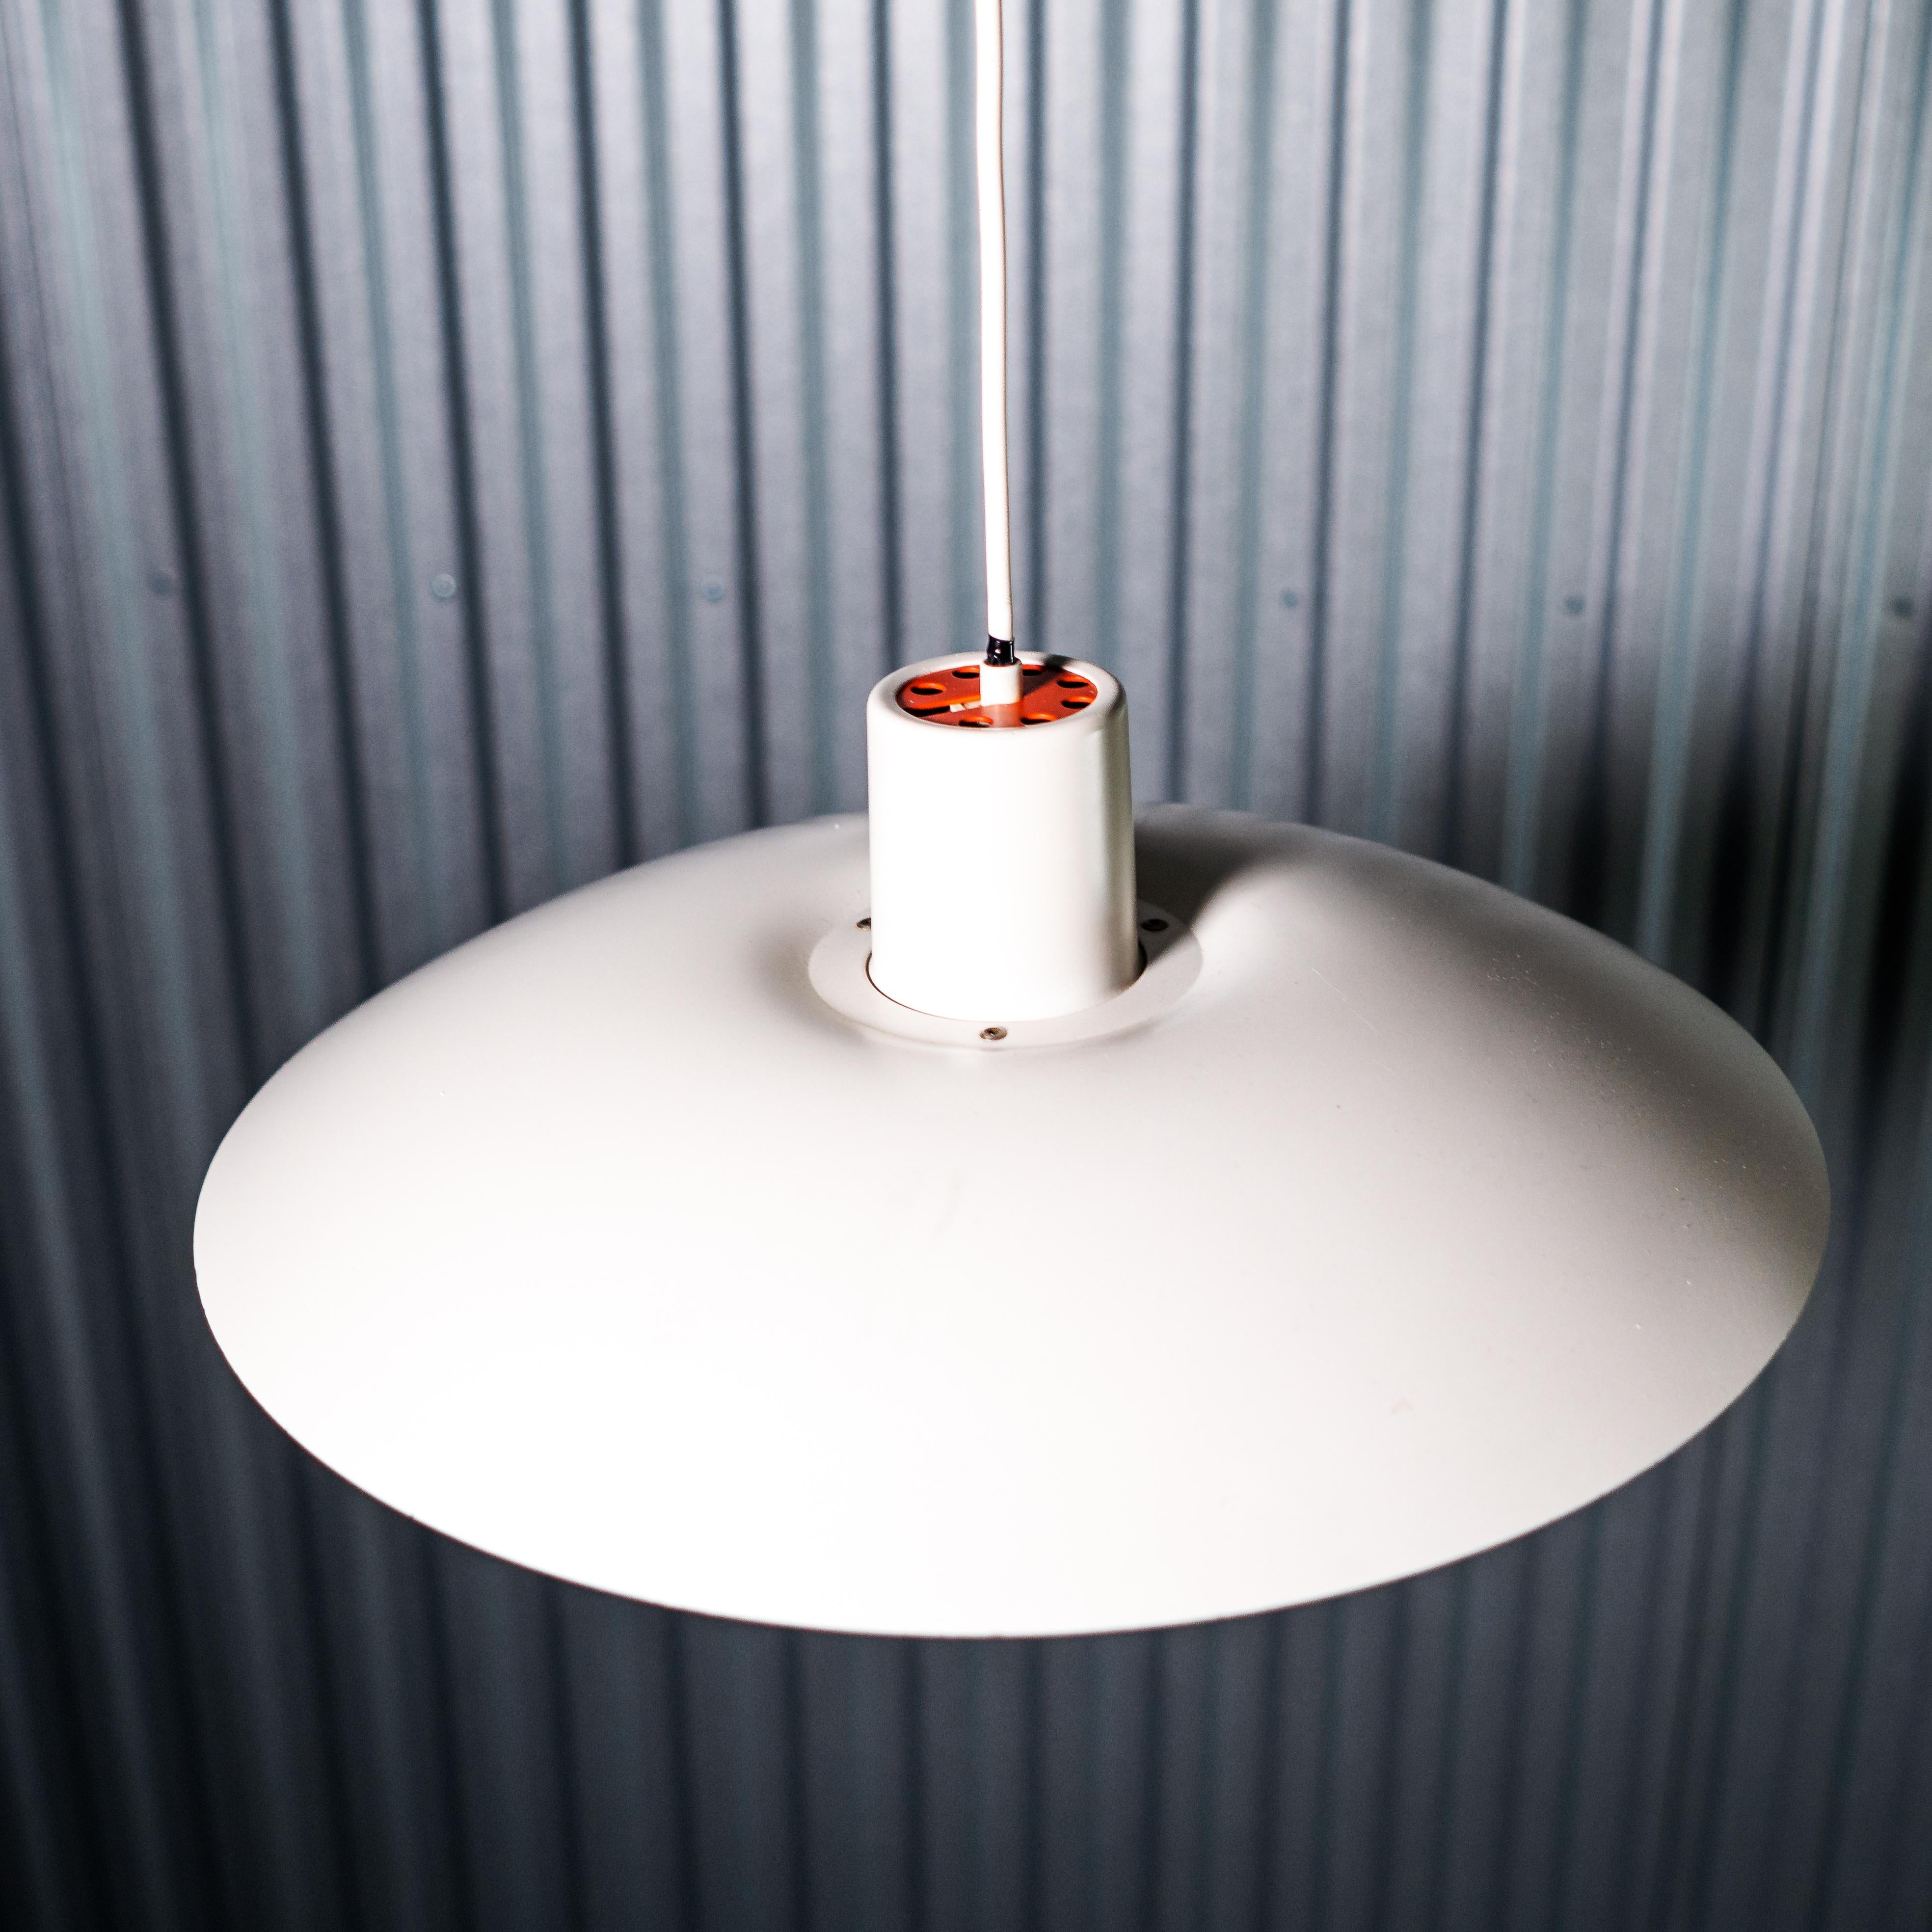 Classic Poul Henningsen 4/3 pendant lamp in white. The lamp illuminates its surroundings with a perfect, harmonious and glare-free light that only the classic three-shade system is capable of emitting. This legendary design stems from Henningsen's